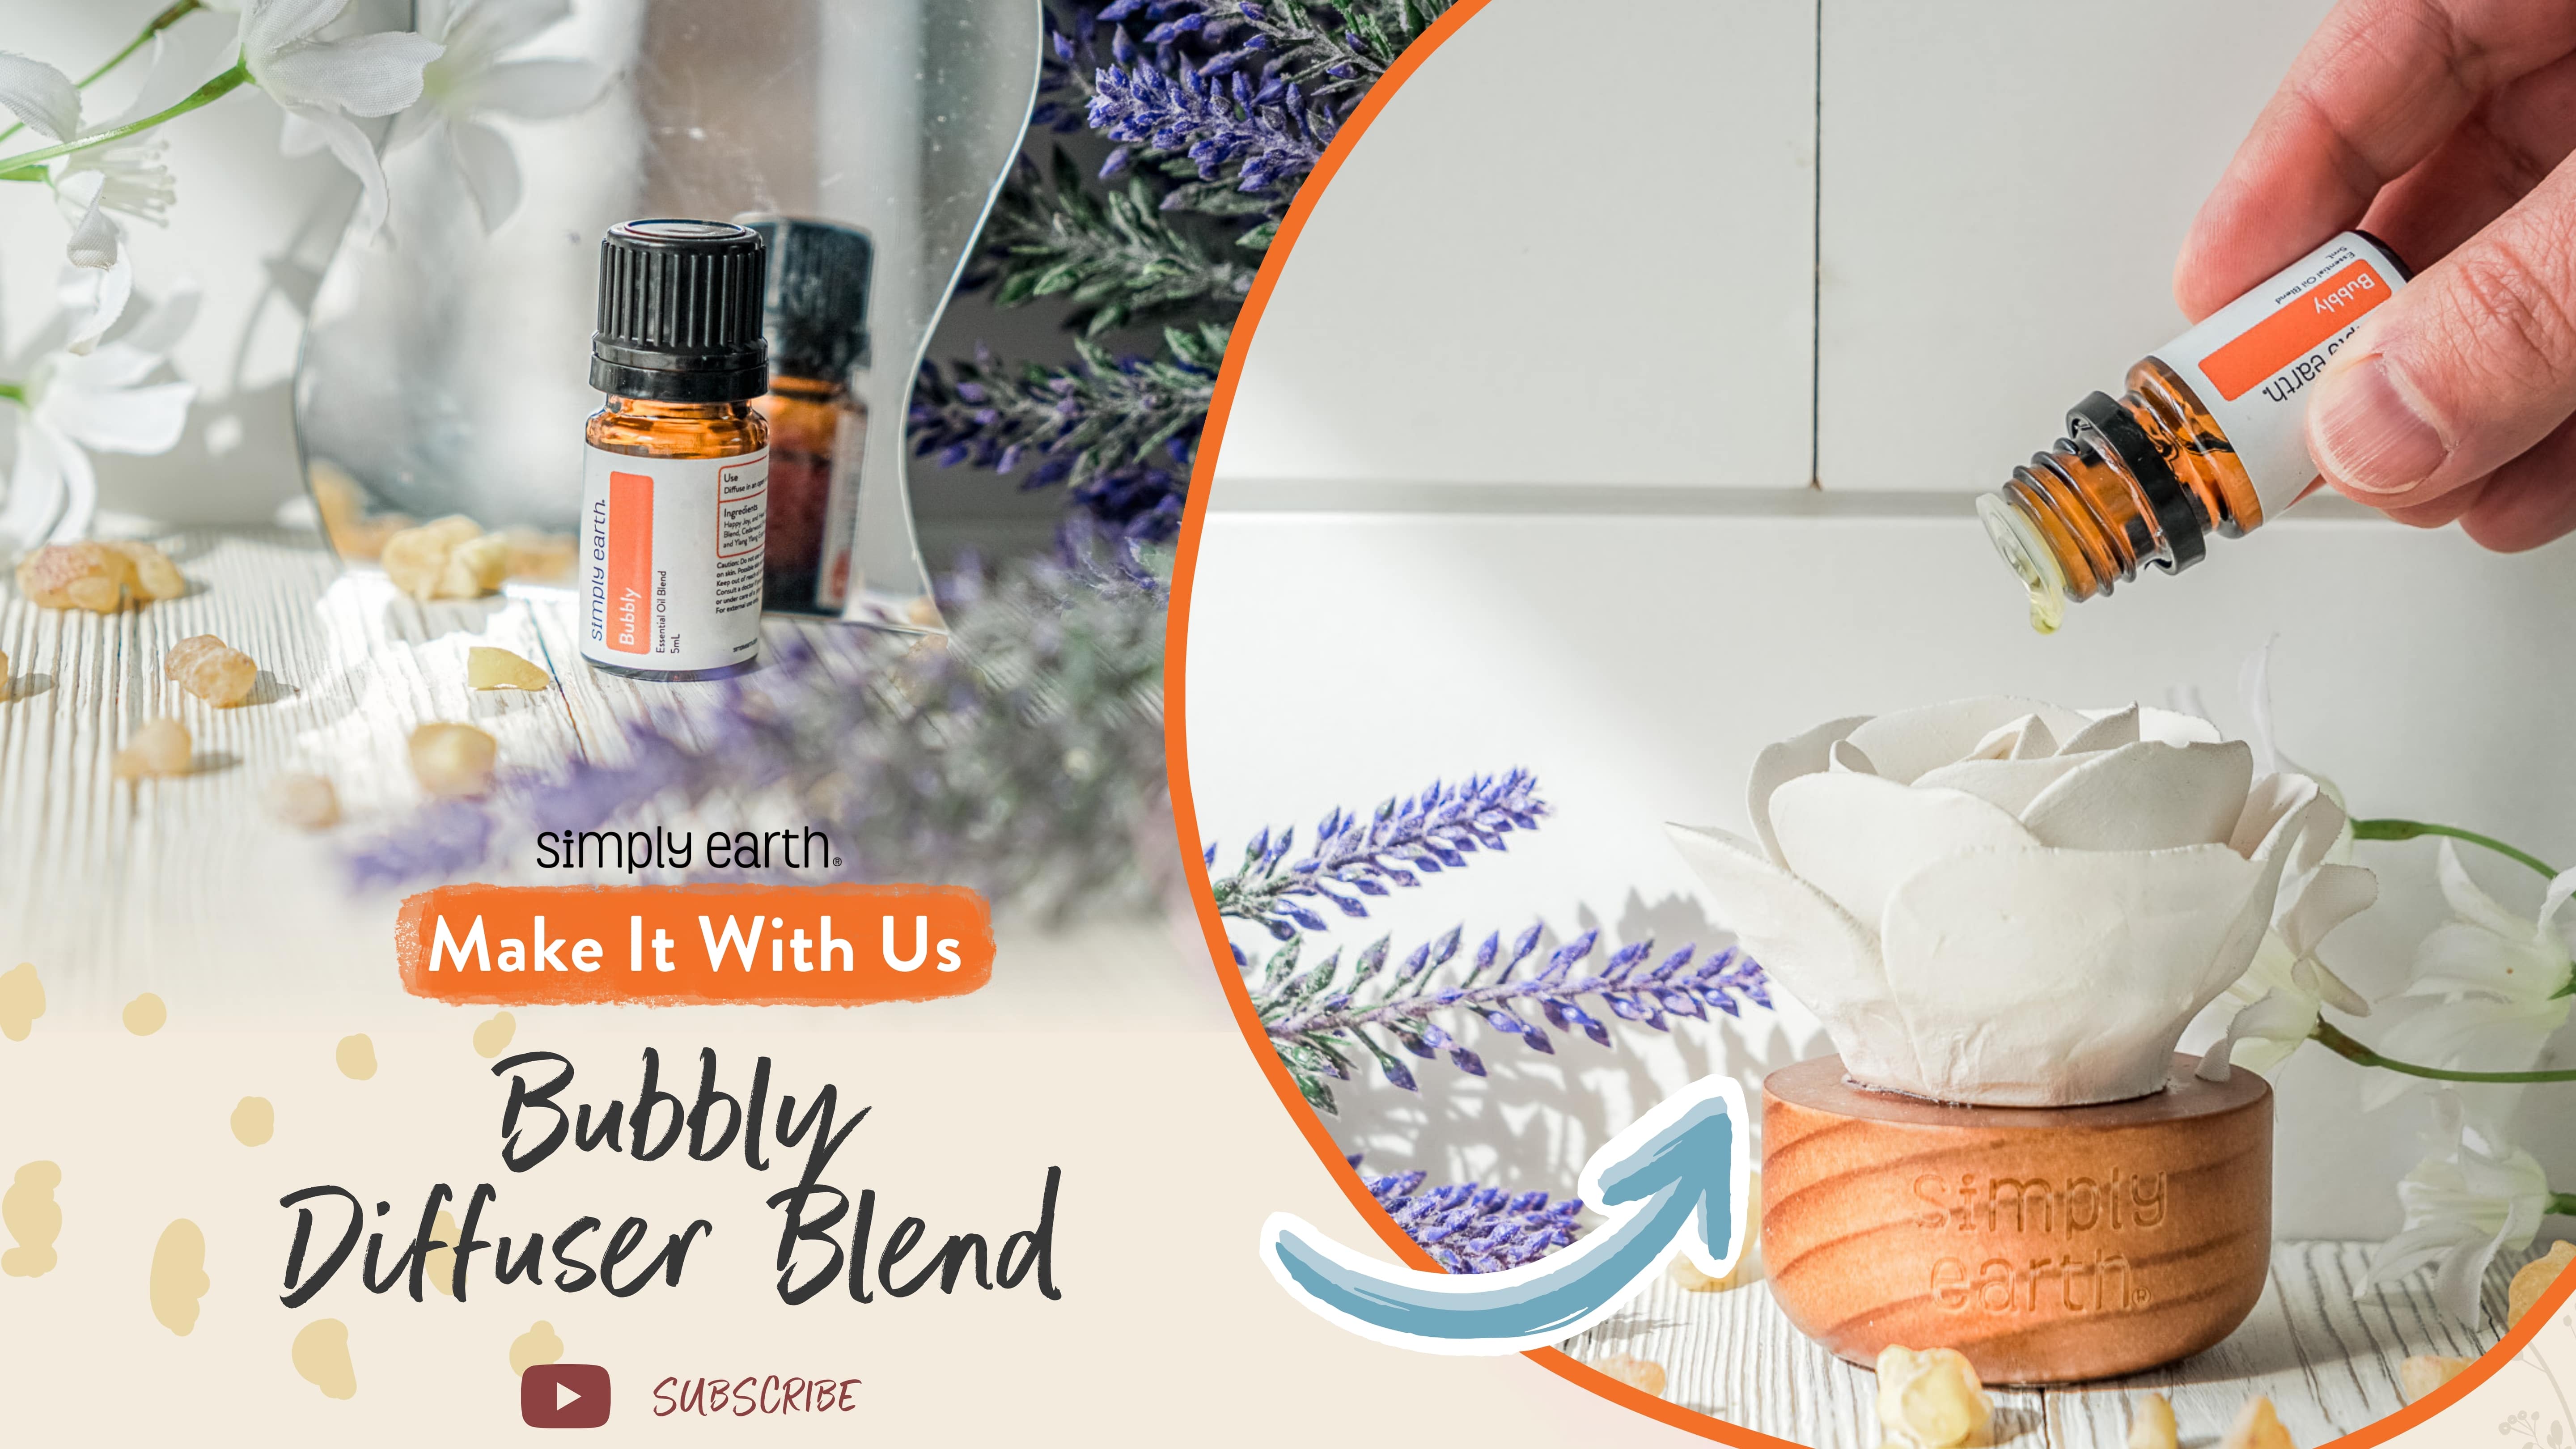 Bubbly Diffuser Blend